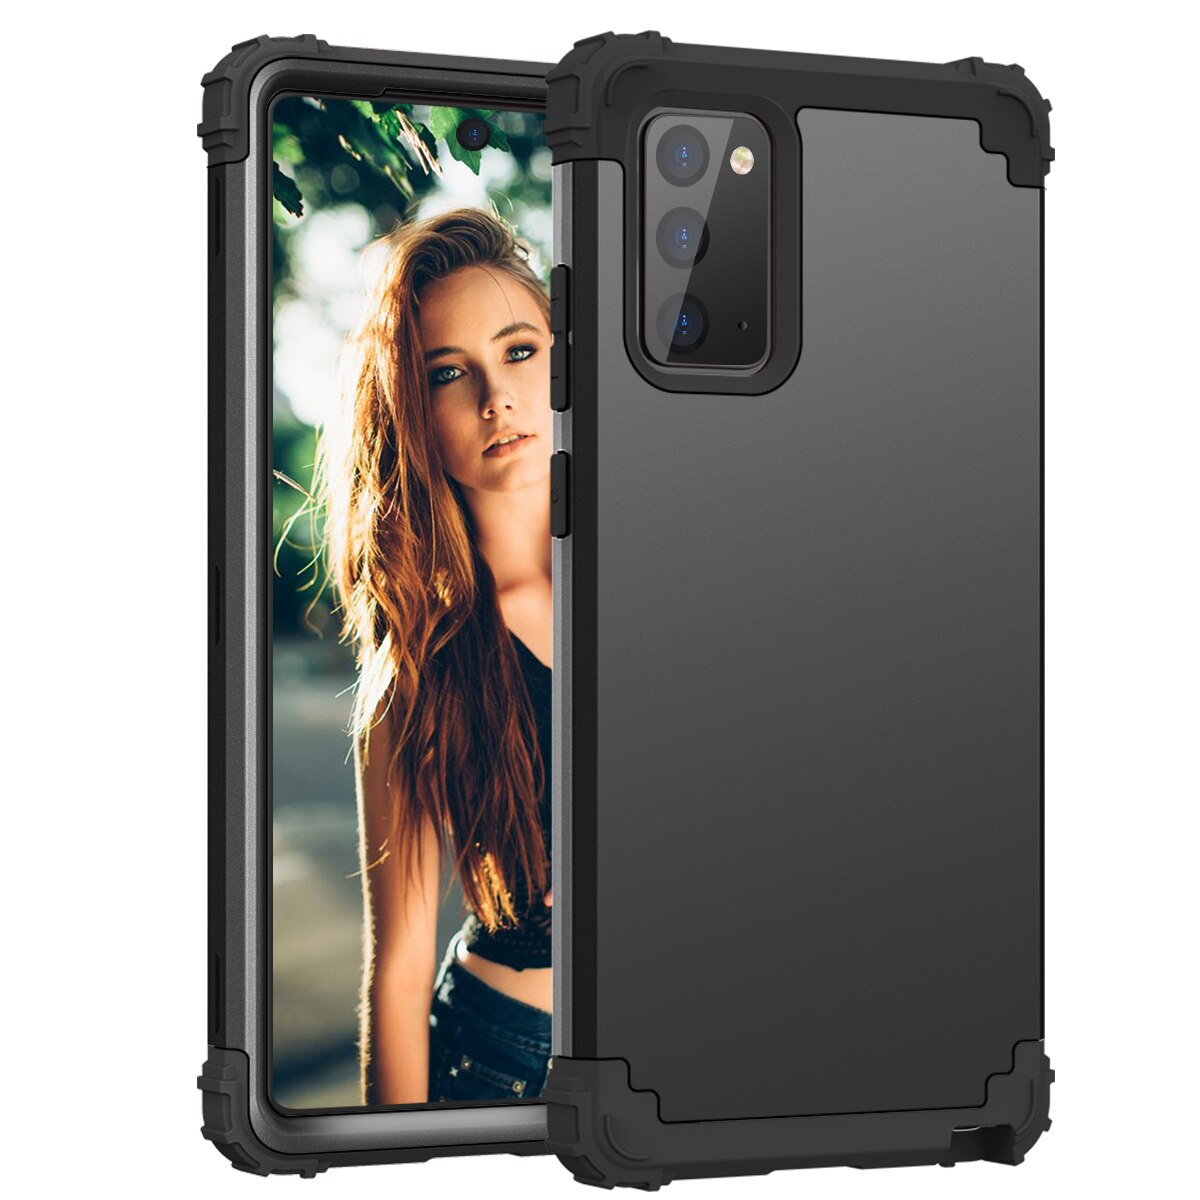 3 in 1 Shockproof Protect Case For Samsung Galaxy Note 20 Ultra Hybrid Hard Rubber Impact Armor Phone Cases for Galaxy Note 20 - 380230 Note 20 / Black / United States Find Epic Store